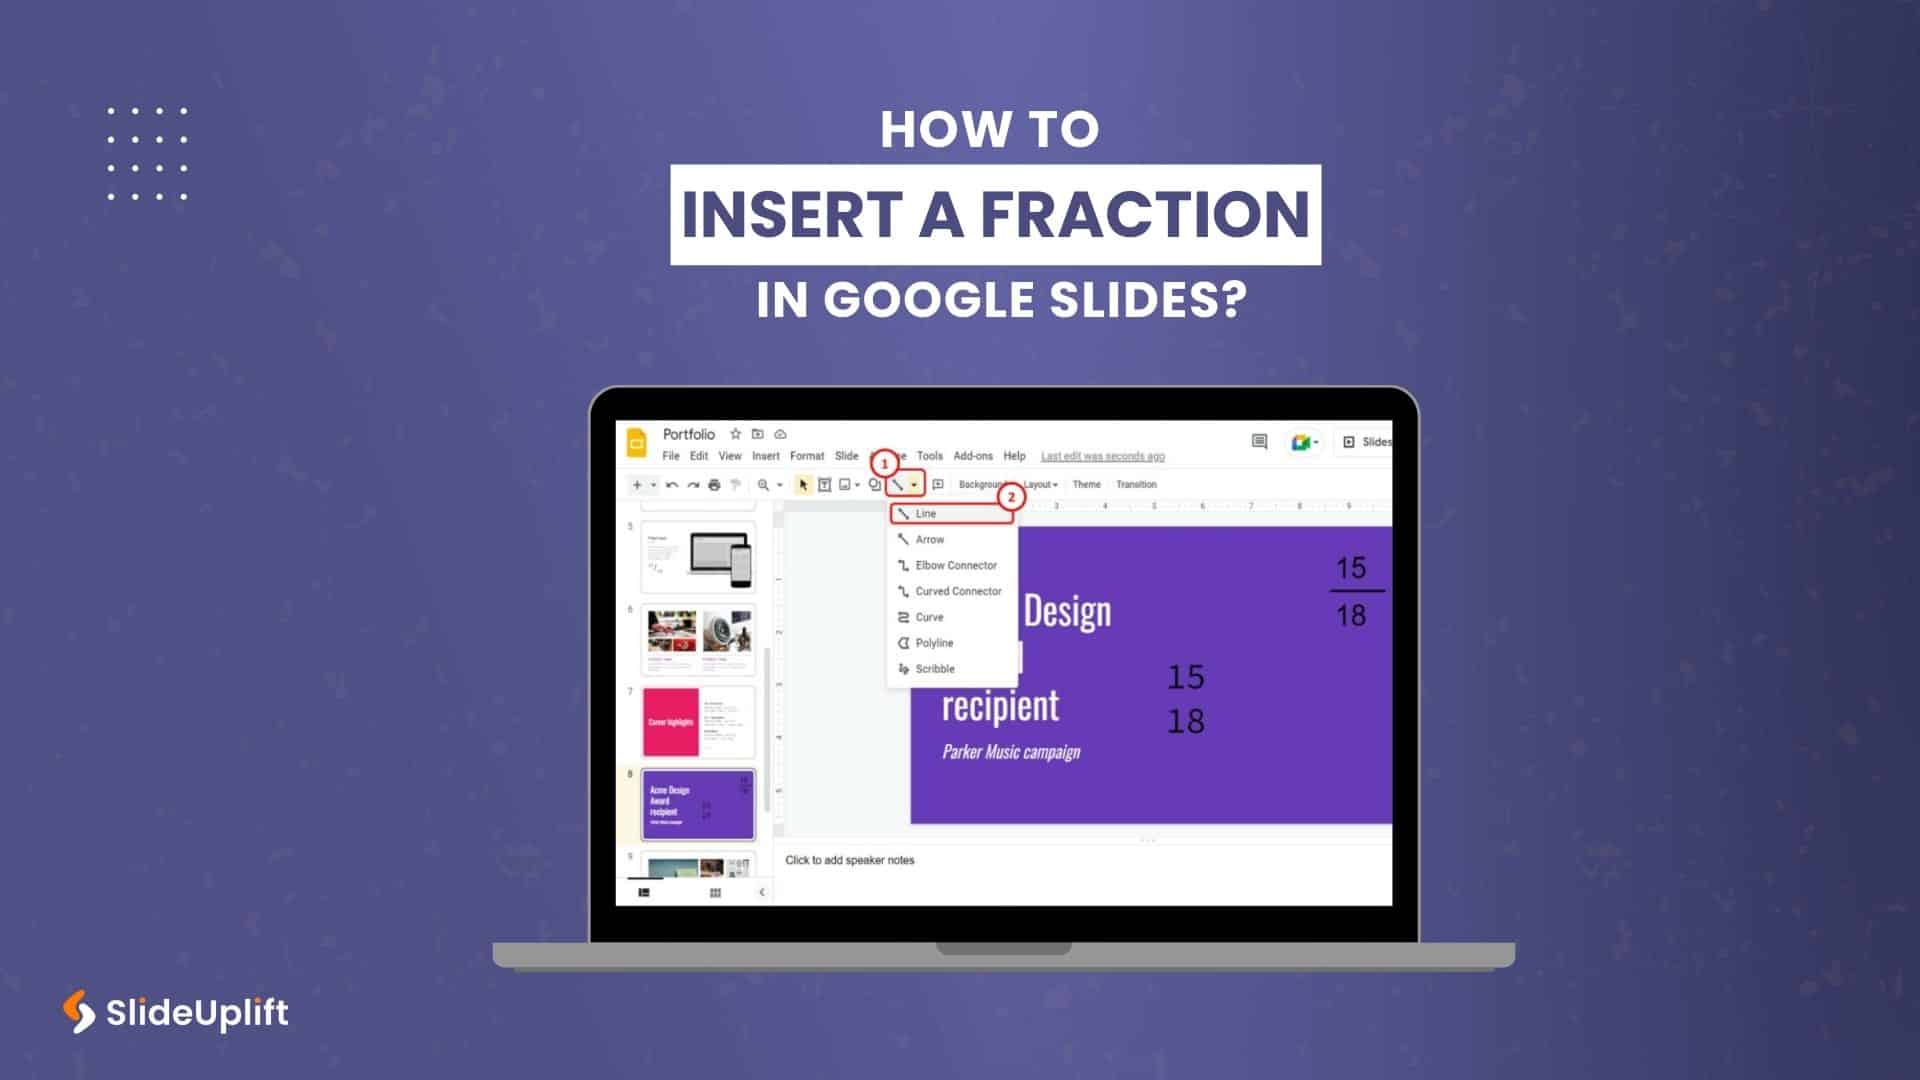 how to make your google presentation look good